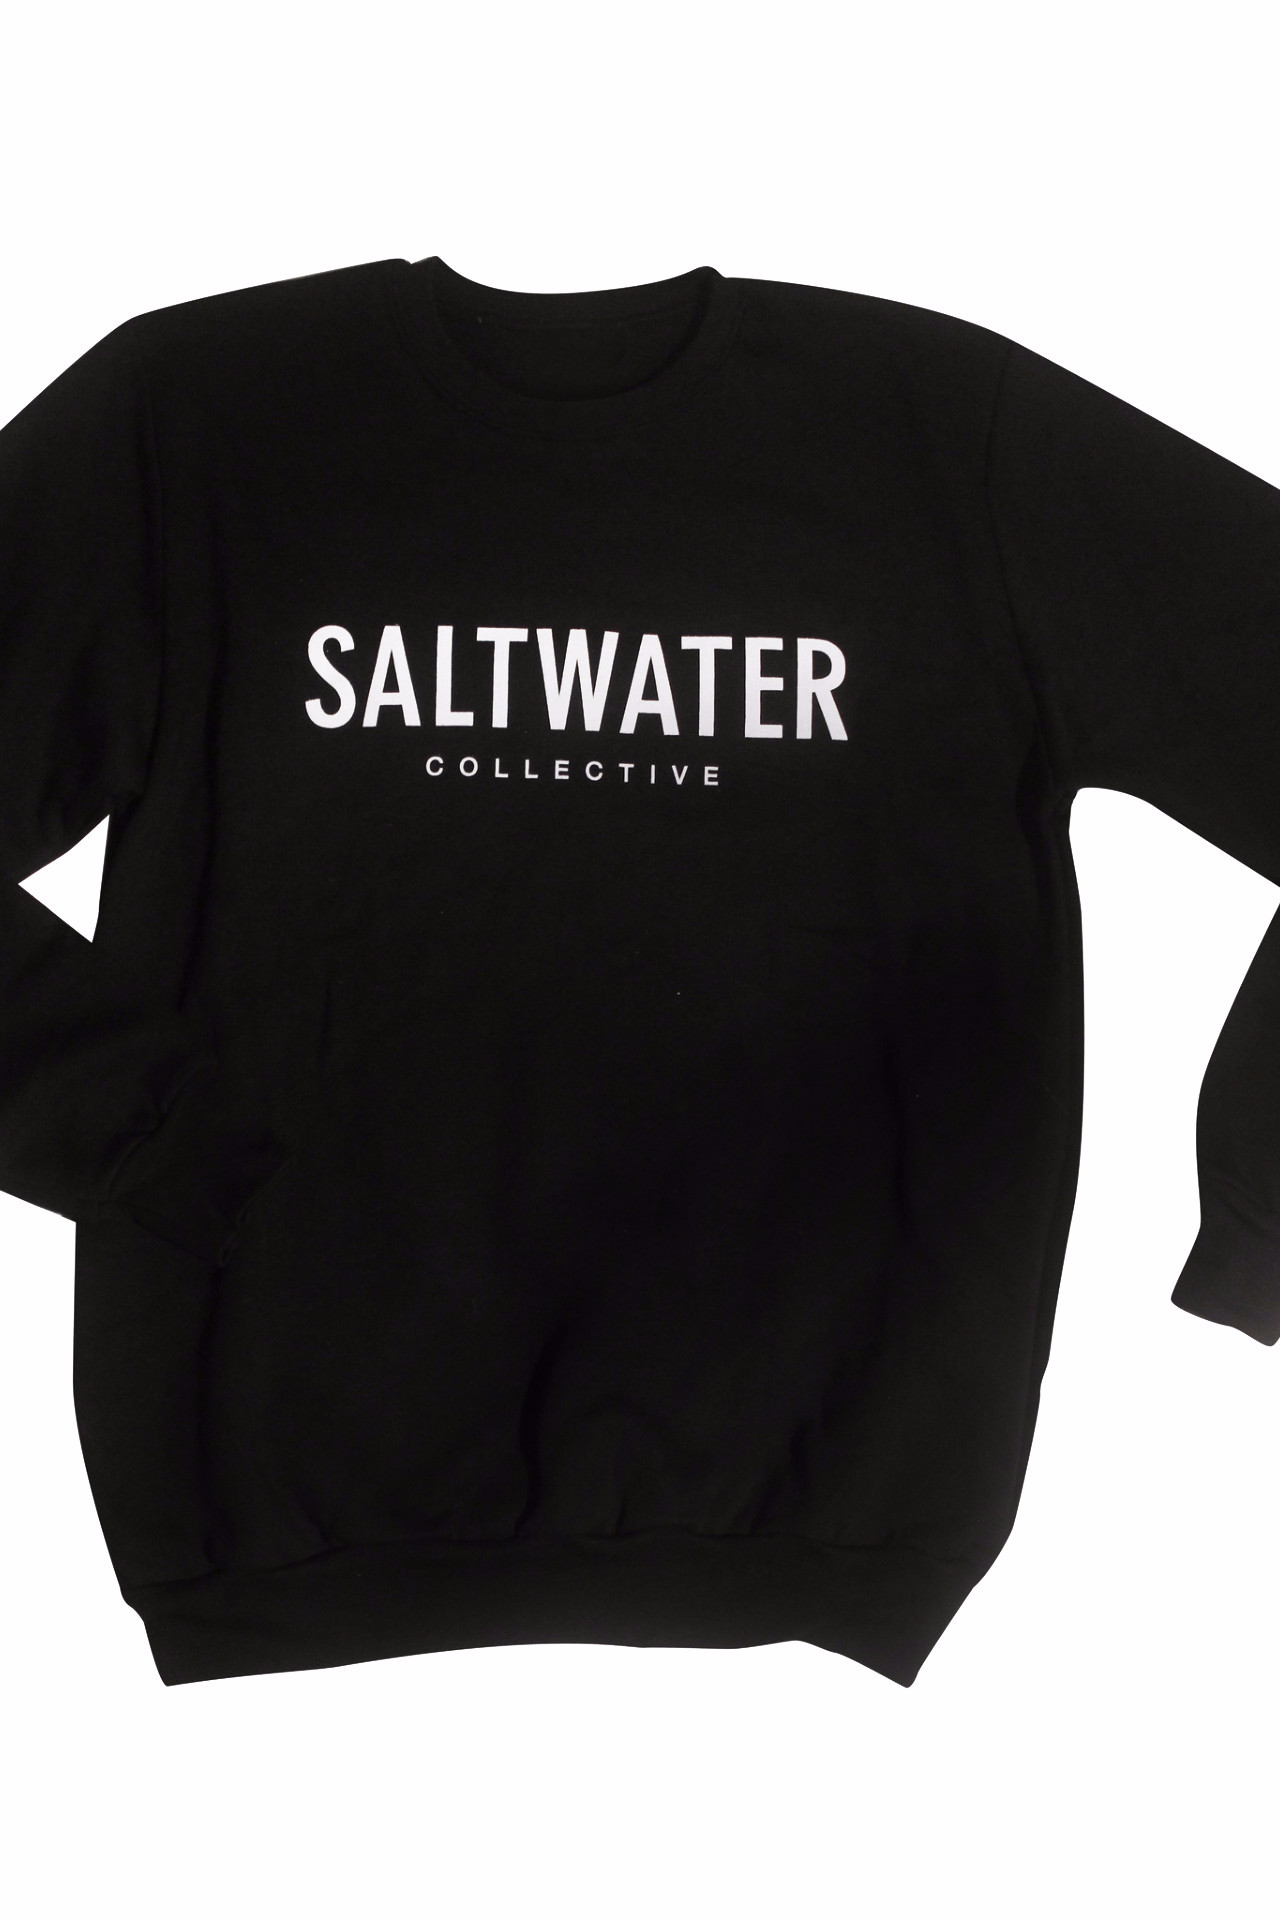 A black crewneck cotton sweatshirt with a white logo printed across the chest.